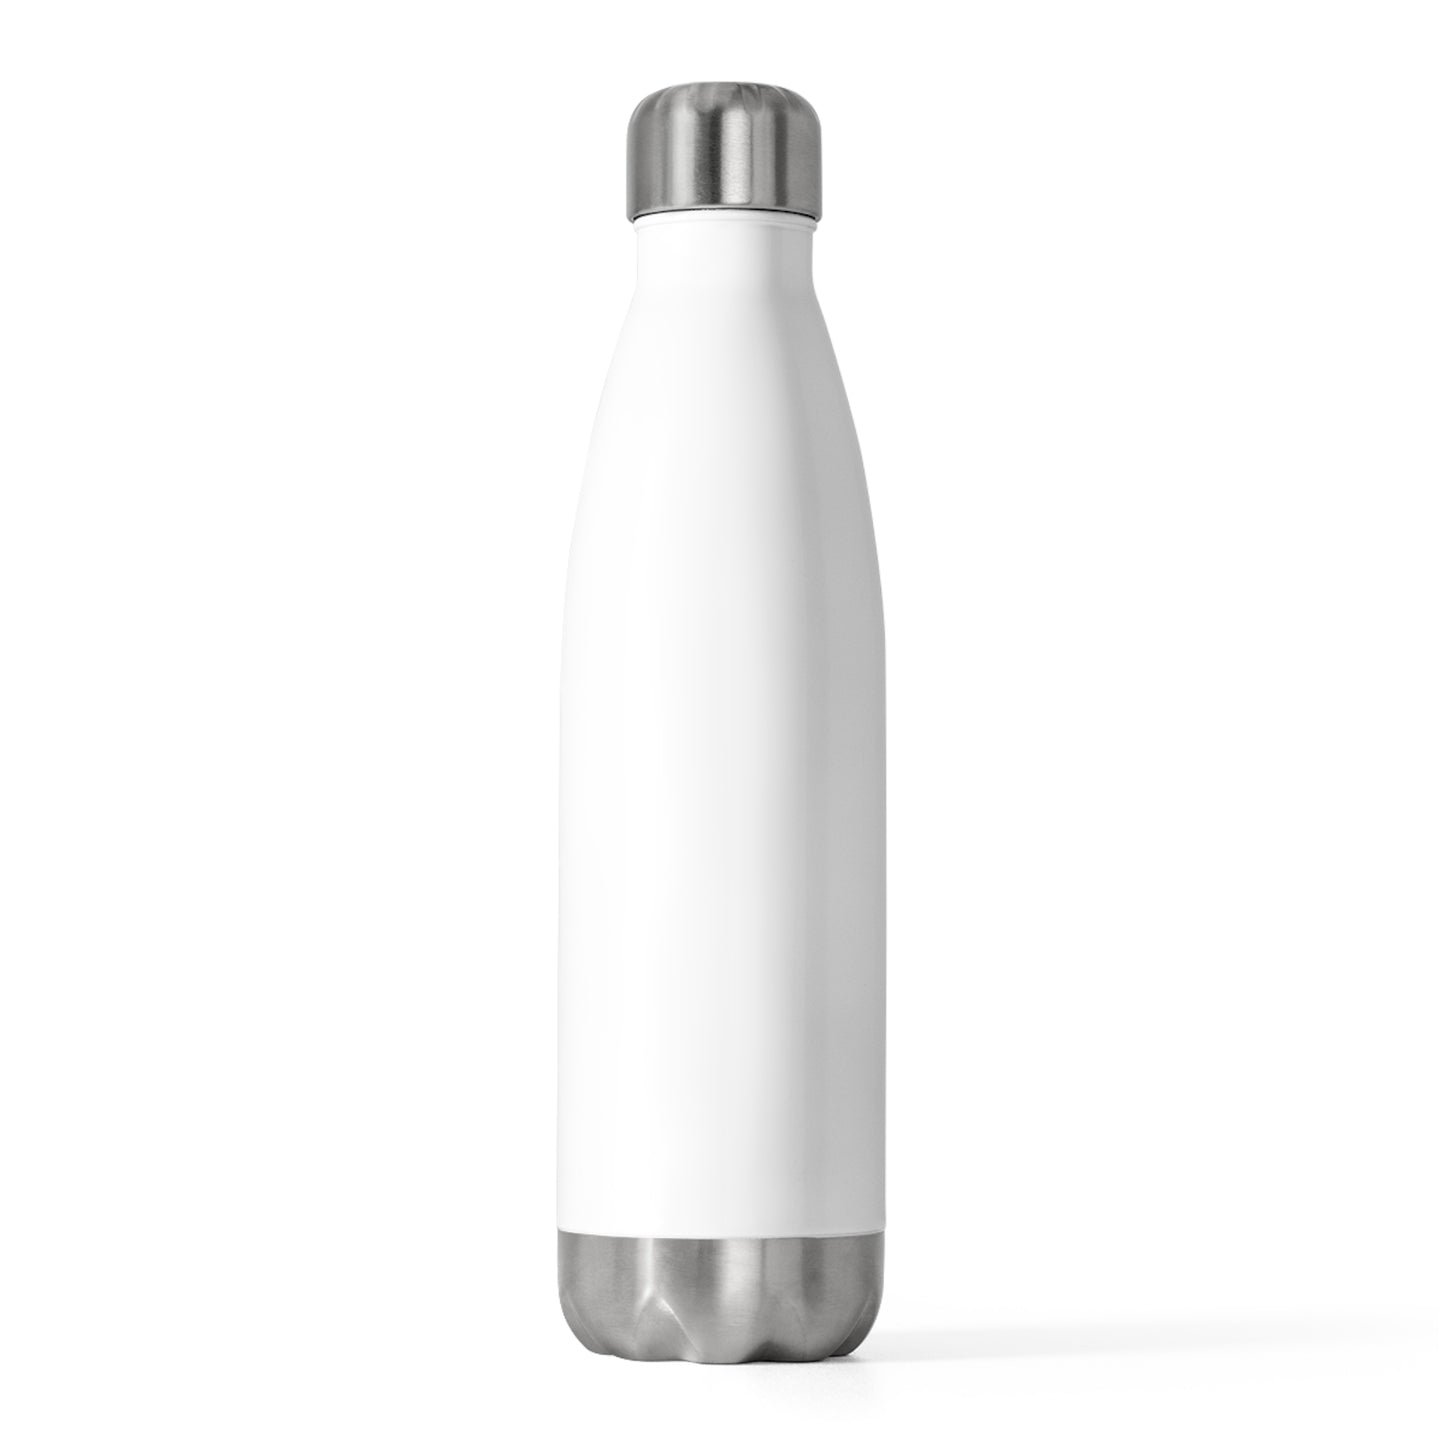 God Is Always In Control Insulated Bottle 20 oz